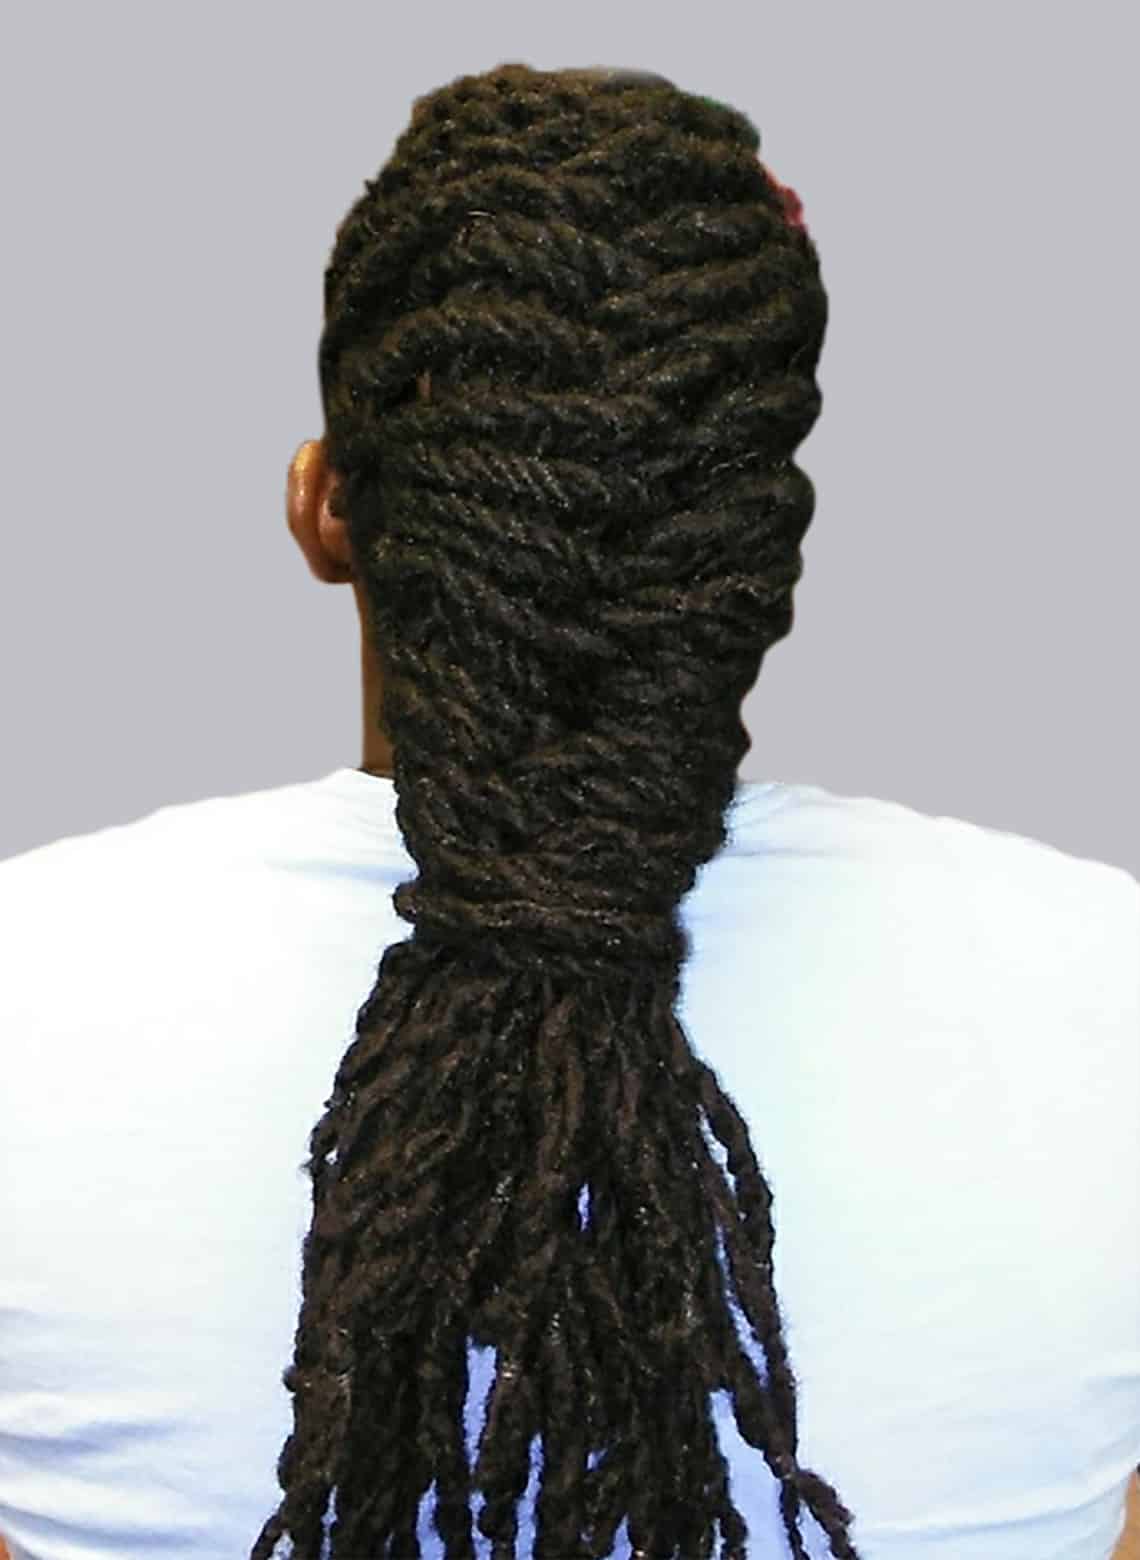 person with fishtail braided dreads